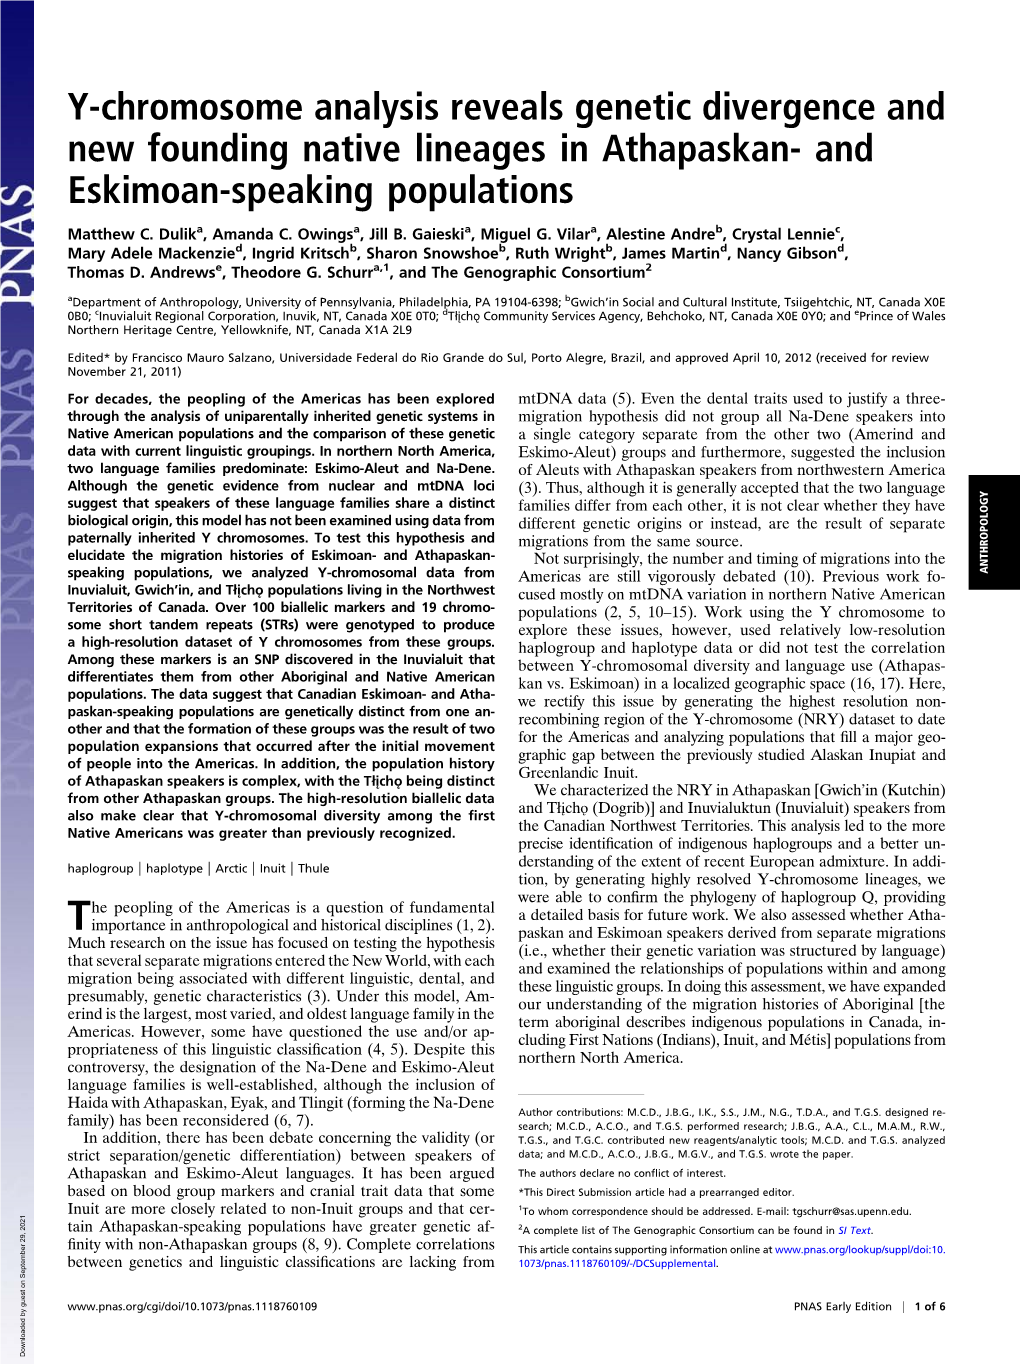 Y-Chromosome Analysis Reveals Genetic Divergence and New Founding Native Lineages in Athapaskan- and Eskimoan-Speaking Populations